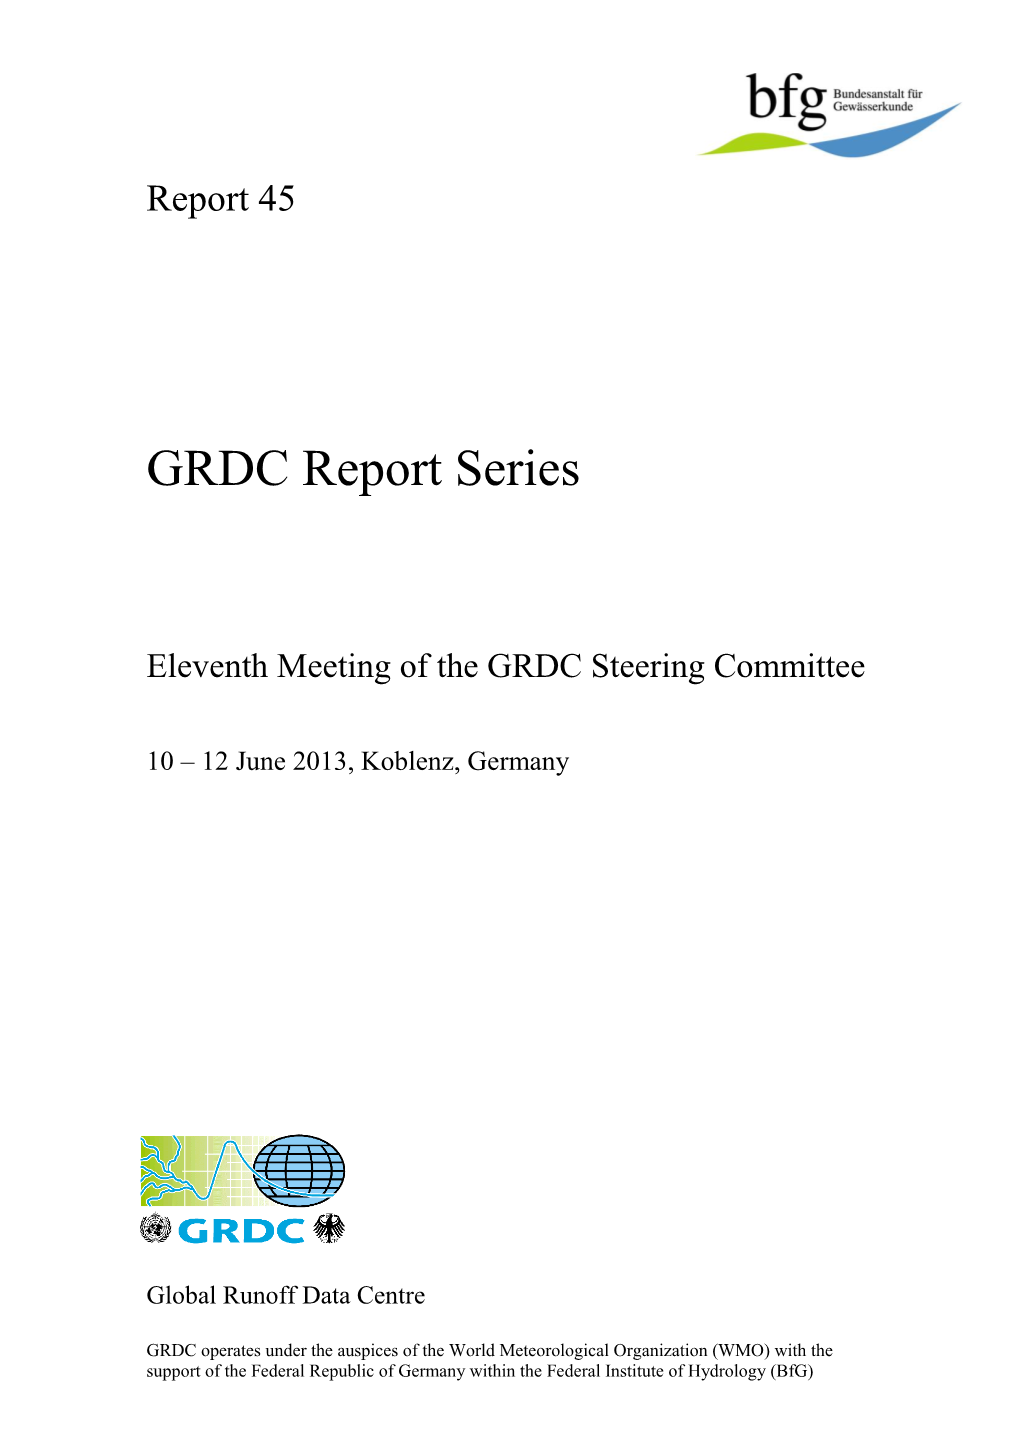 11Th Meeting of the GRDC Steering Committee